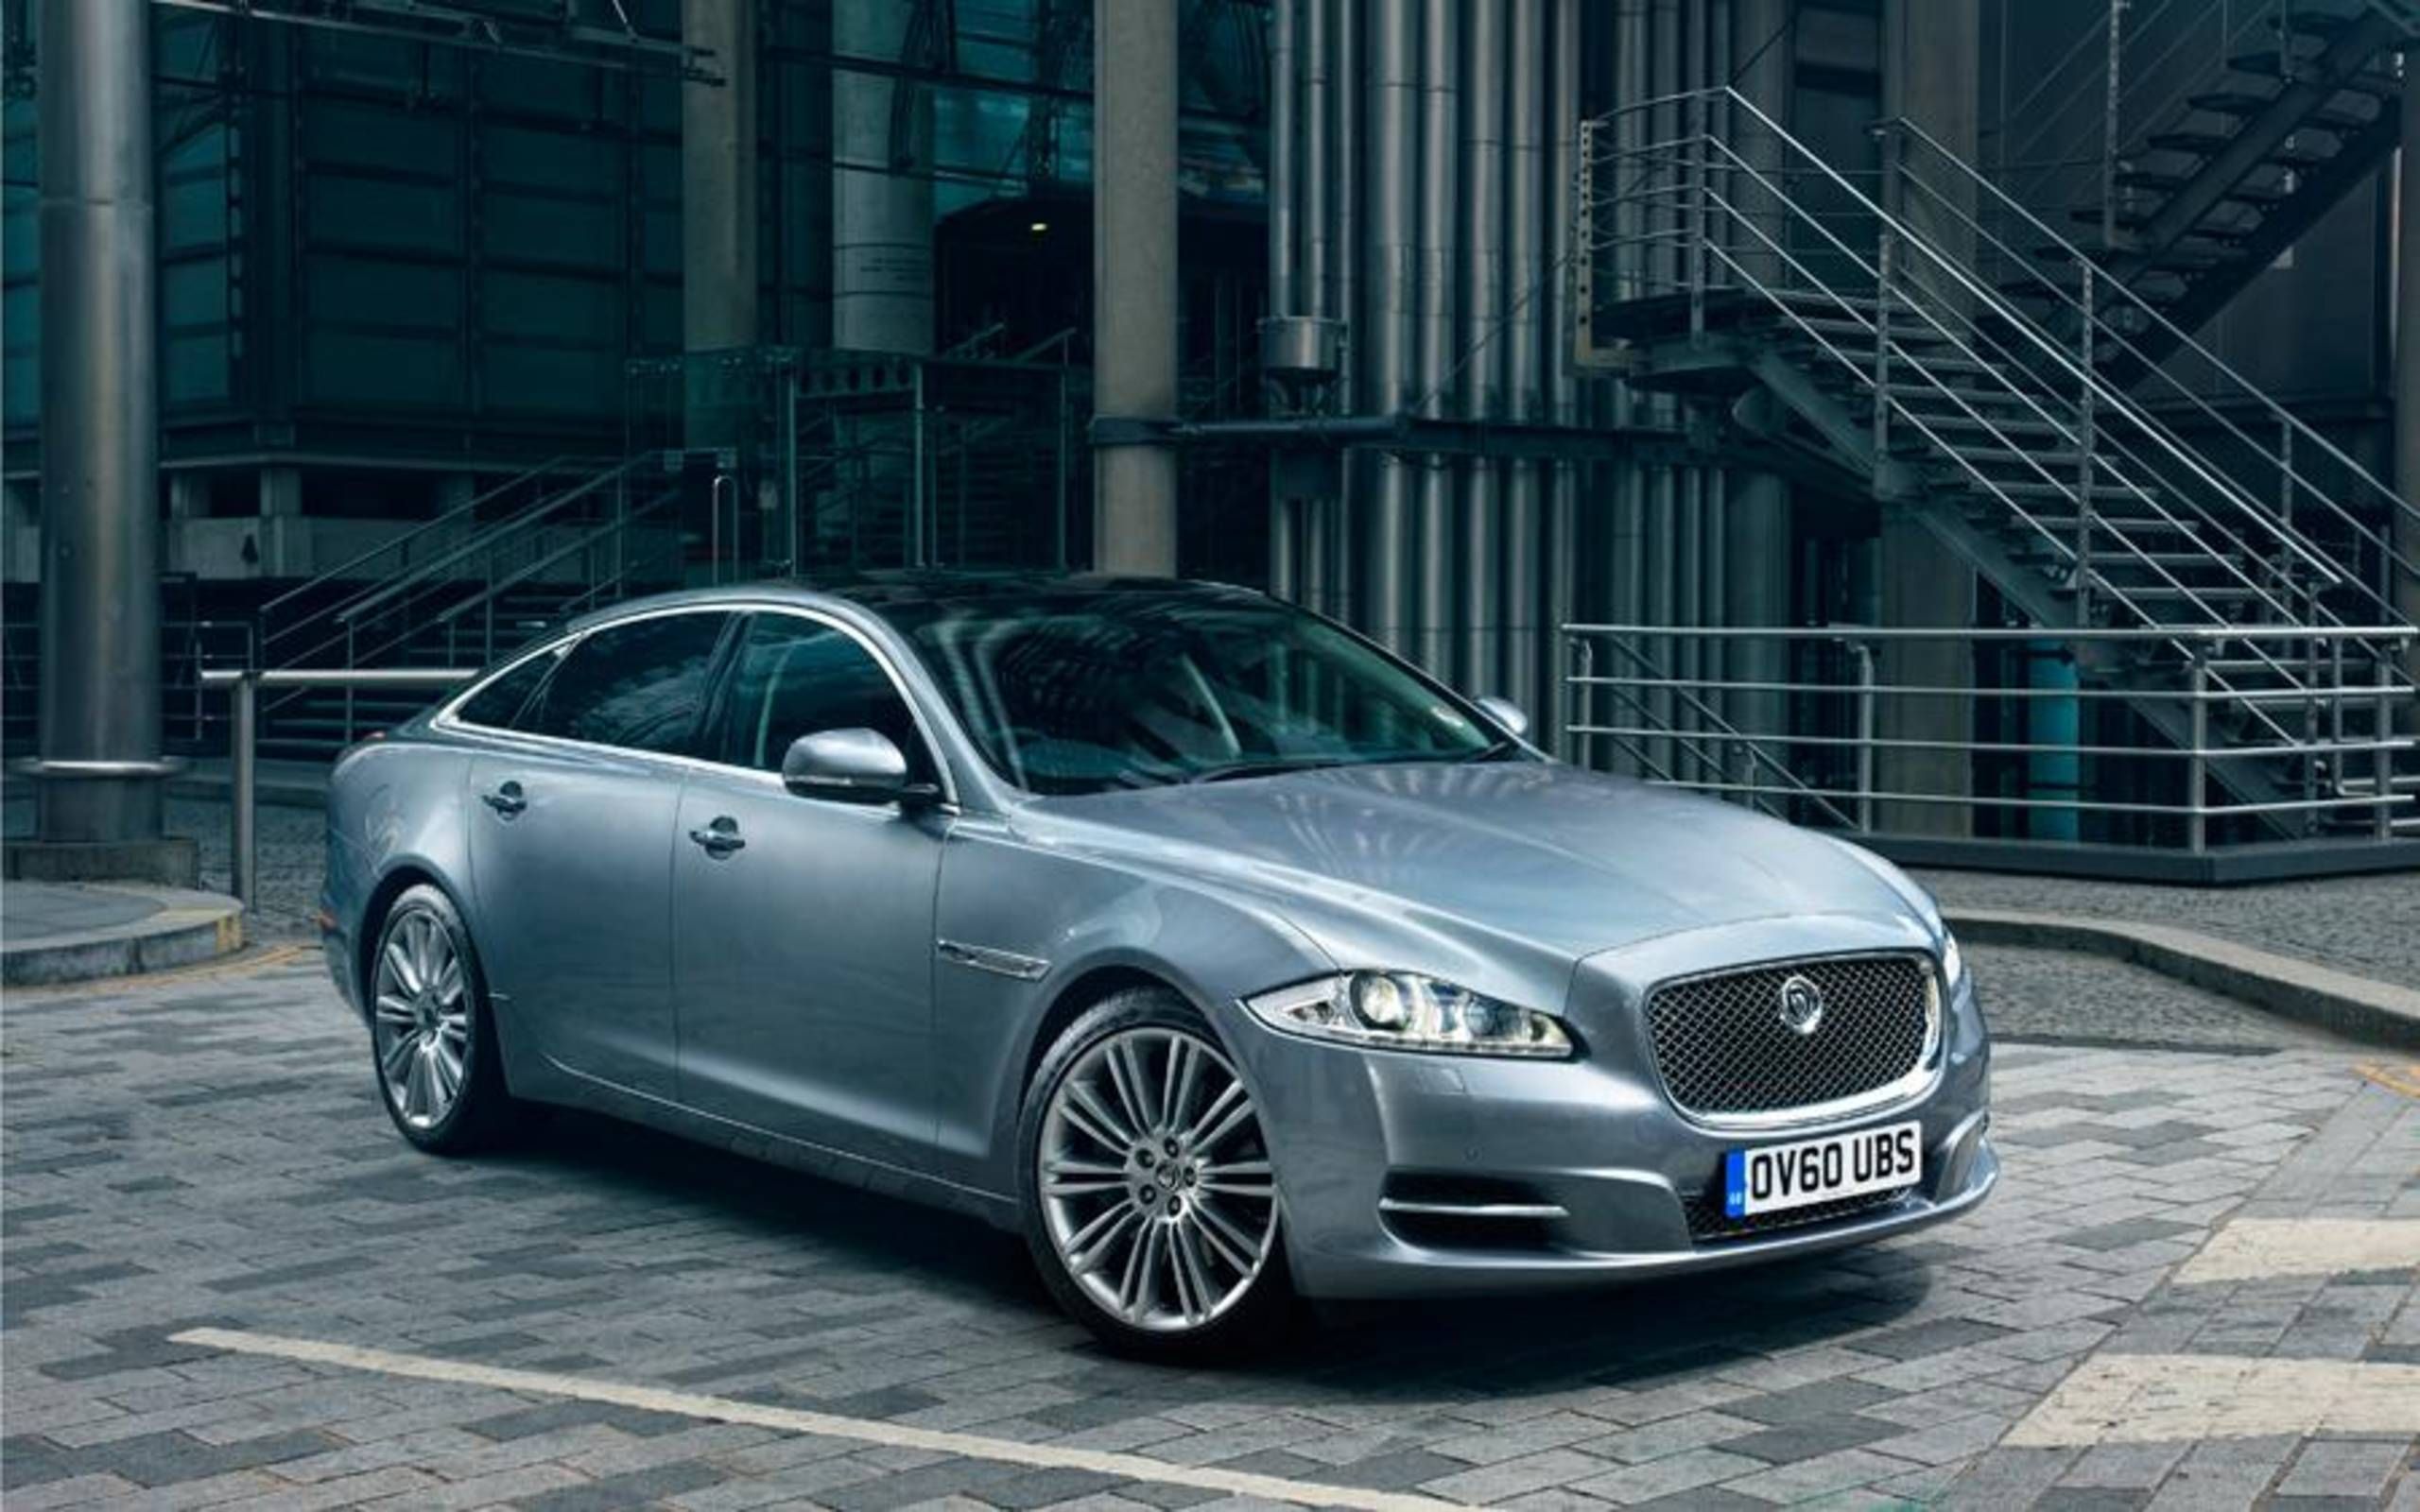 2012 Jaguar XJ: Review notes: A British flagship with an interior to match